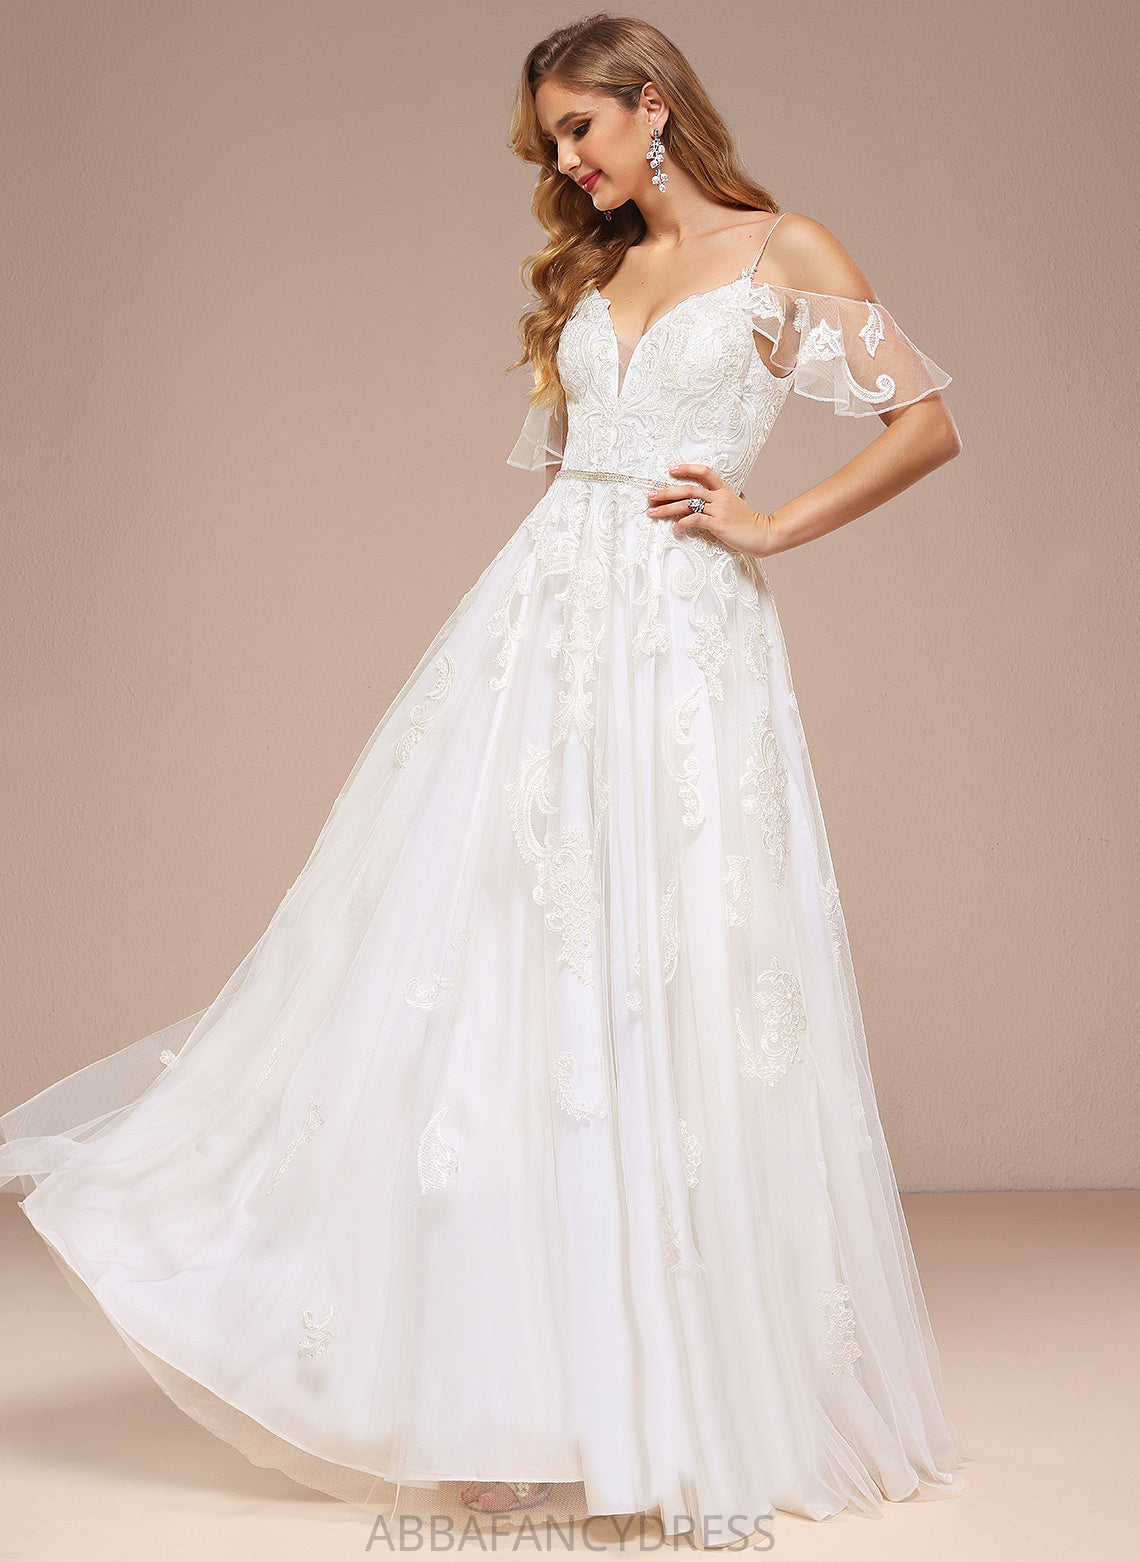 Wedding Dresses Shoulder Wedding Cold Beading Floor-Length A-Line Lace Dress Mya Tulle With Sequins